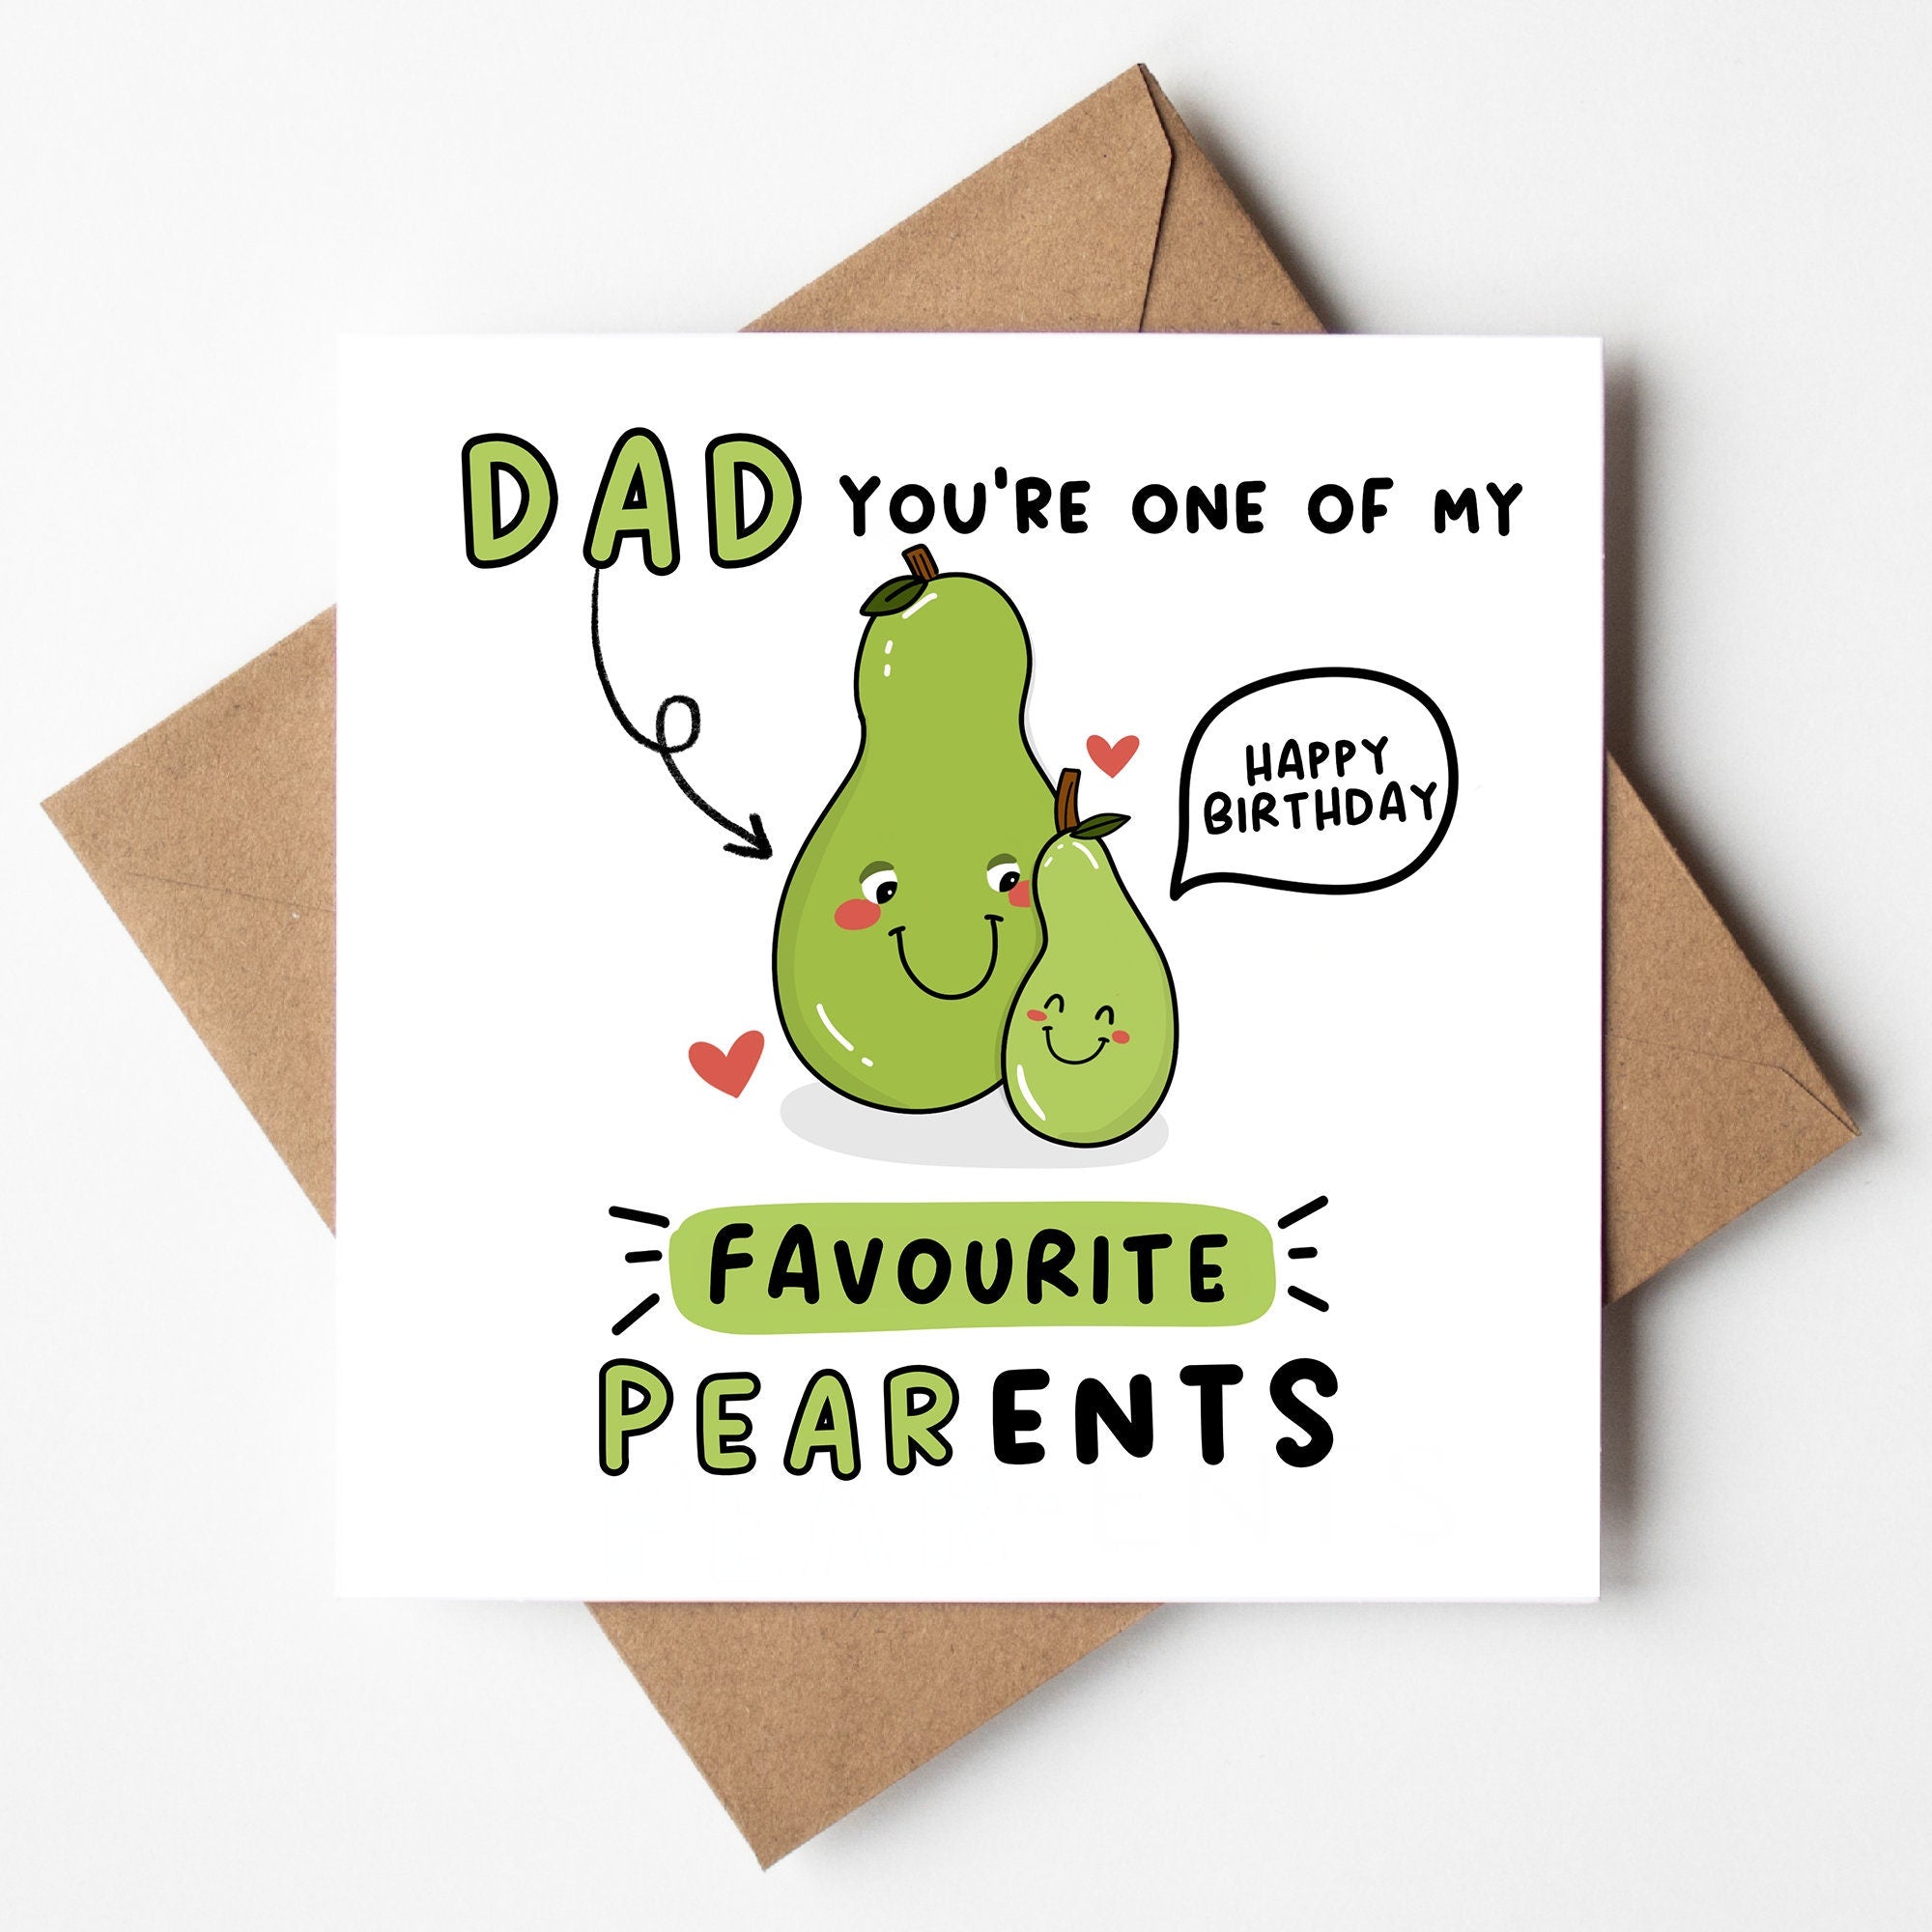 Dad You're One Of My Favourite Pear-ants, best dad ever, from daughter, from son, funny birthday card